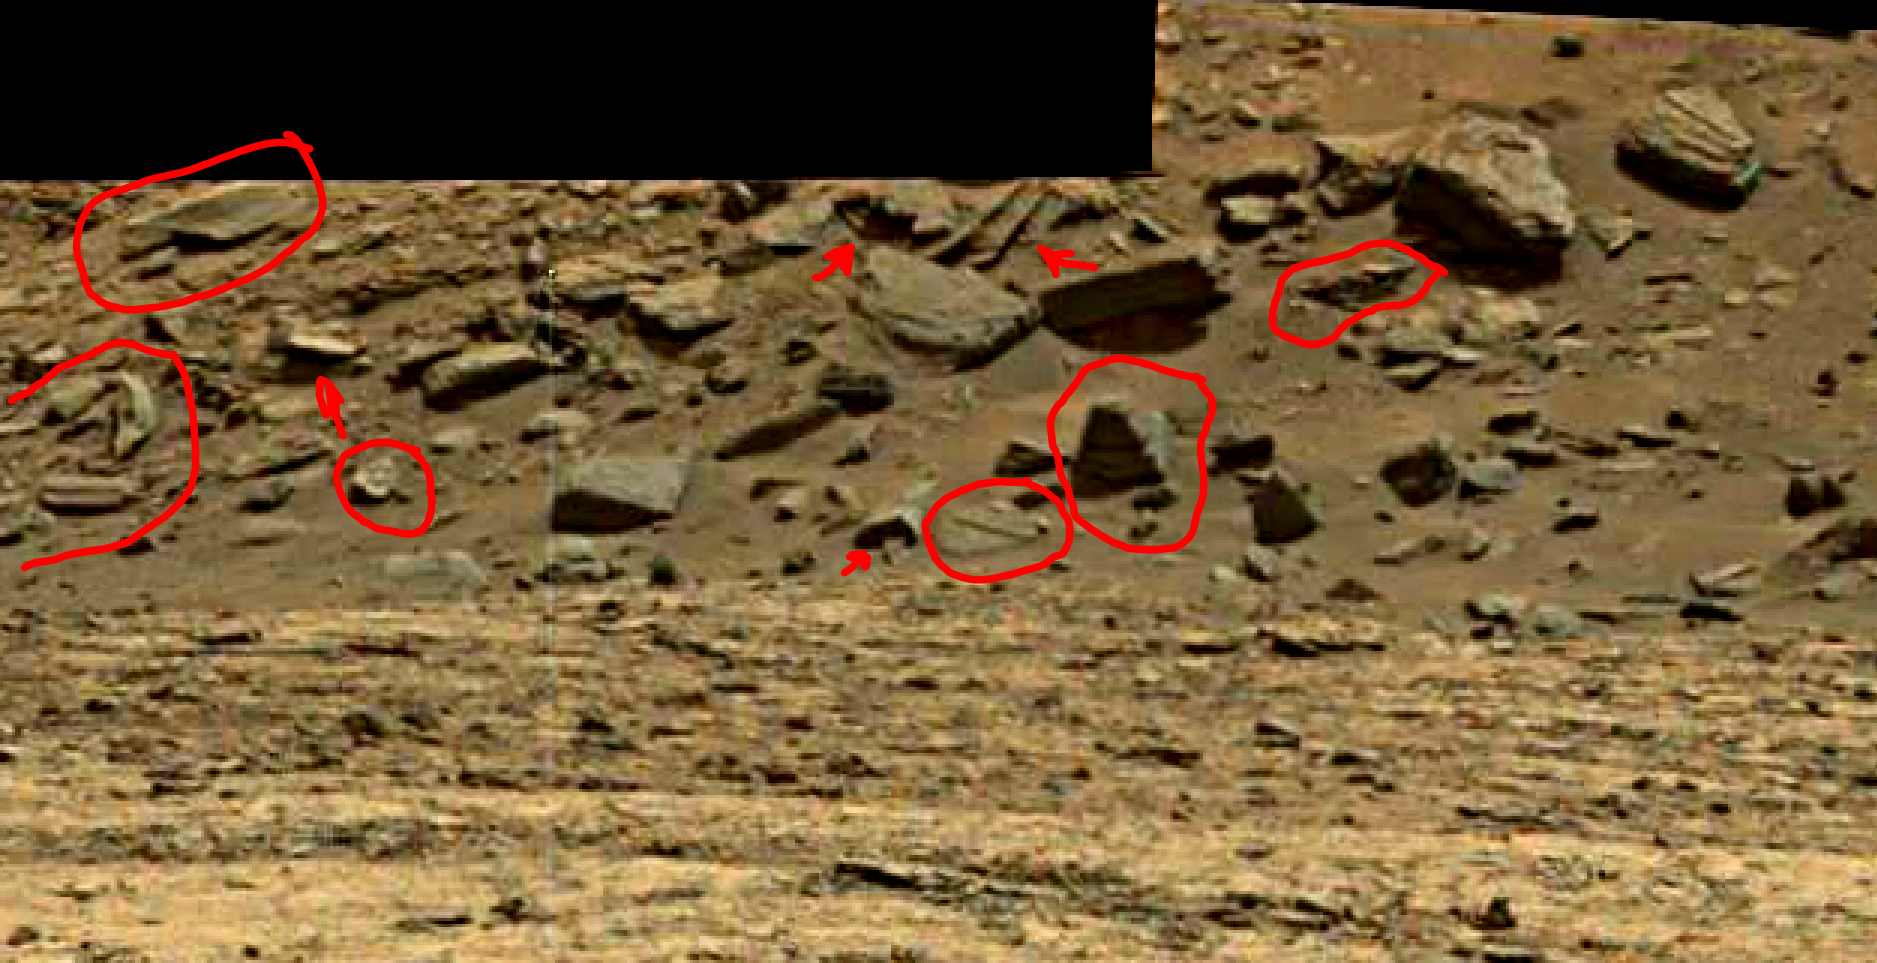 mars sol 1428 anomaly artifacts 2a was life on mars